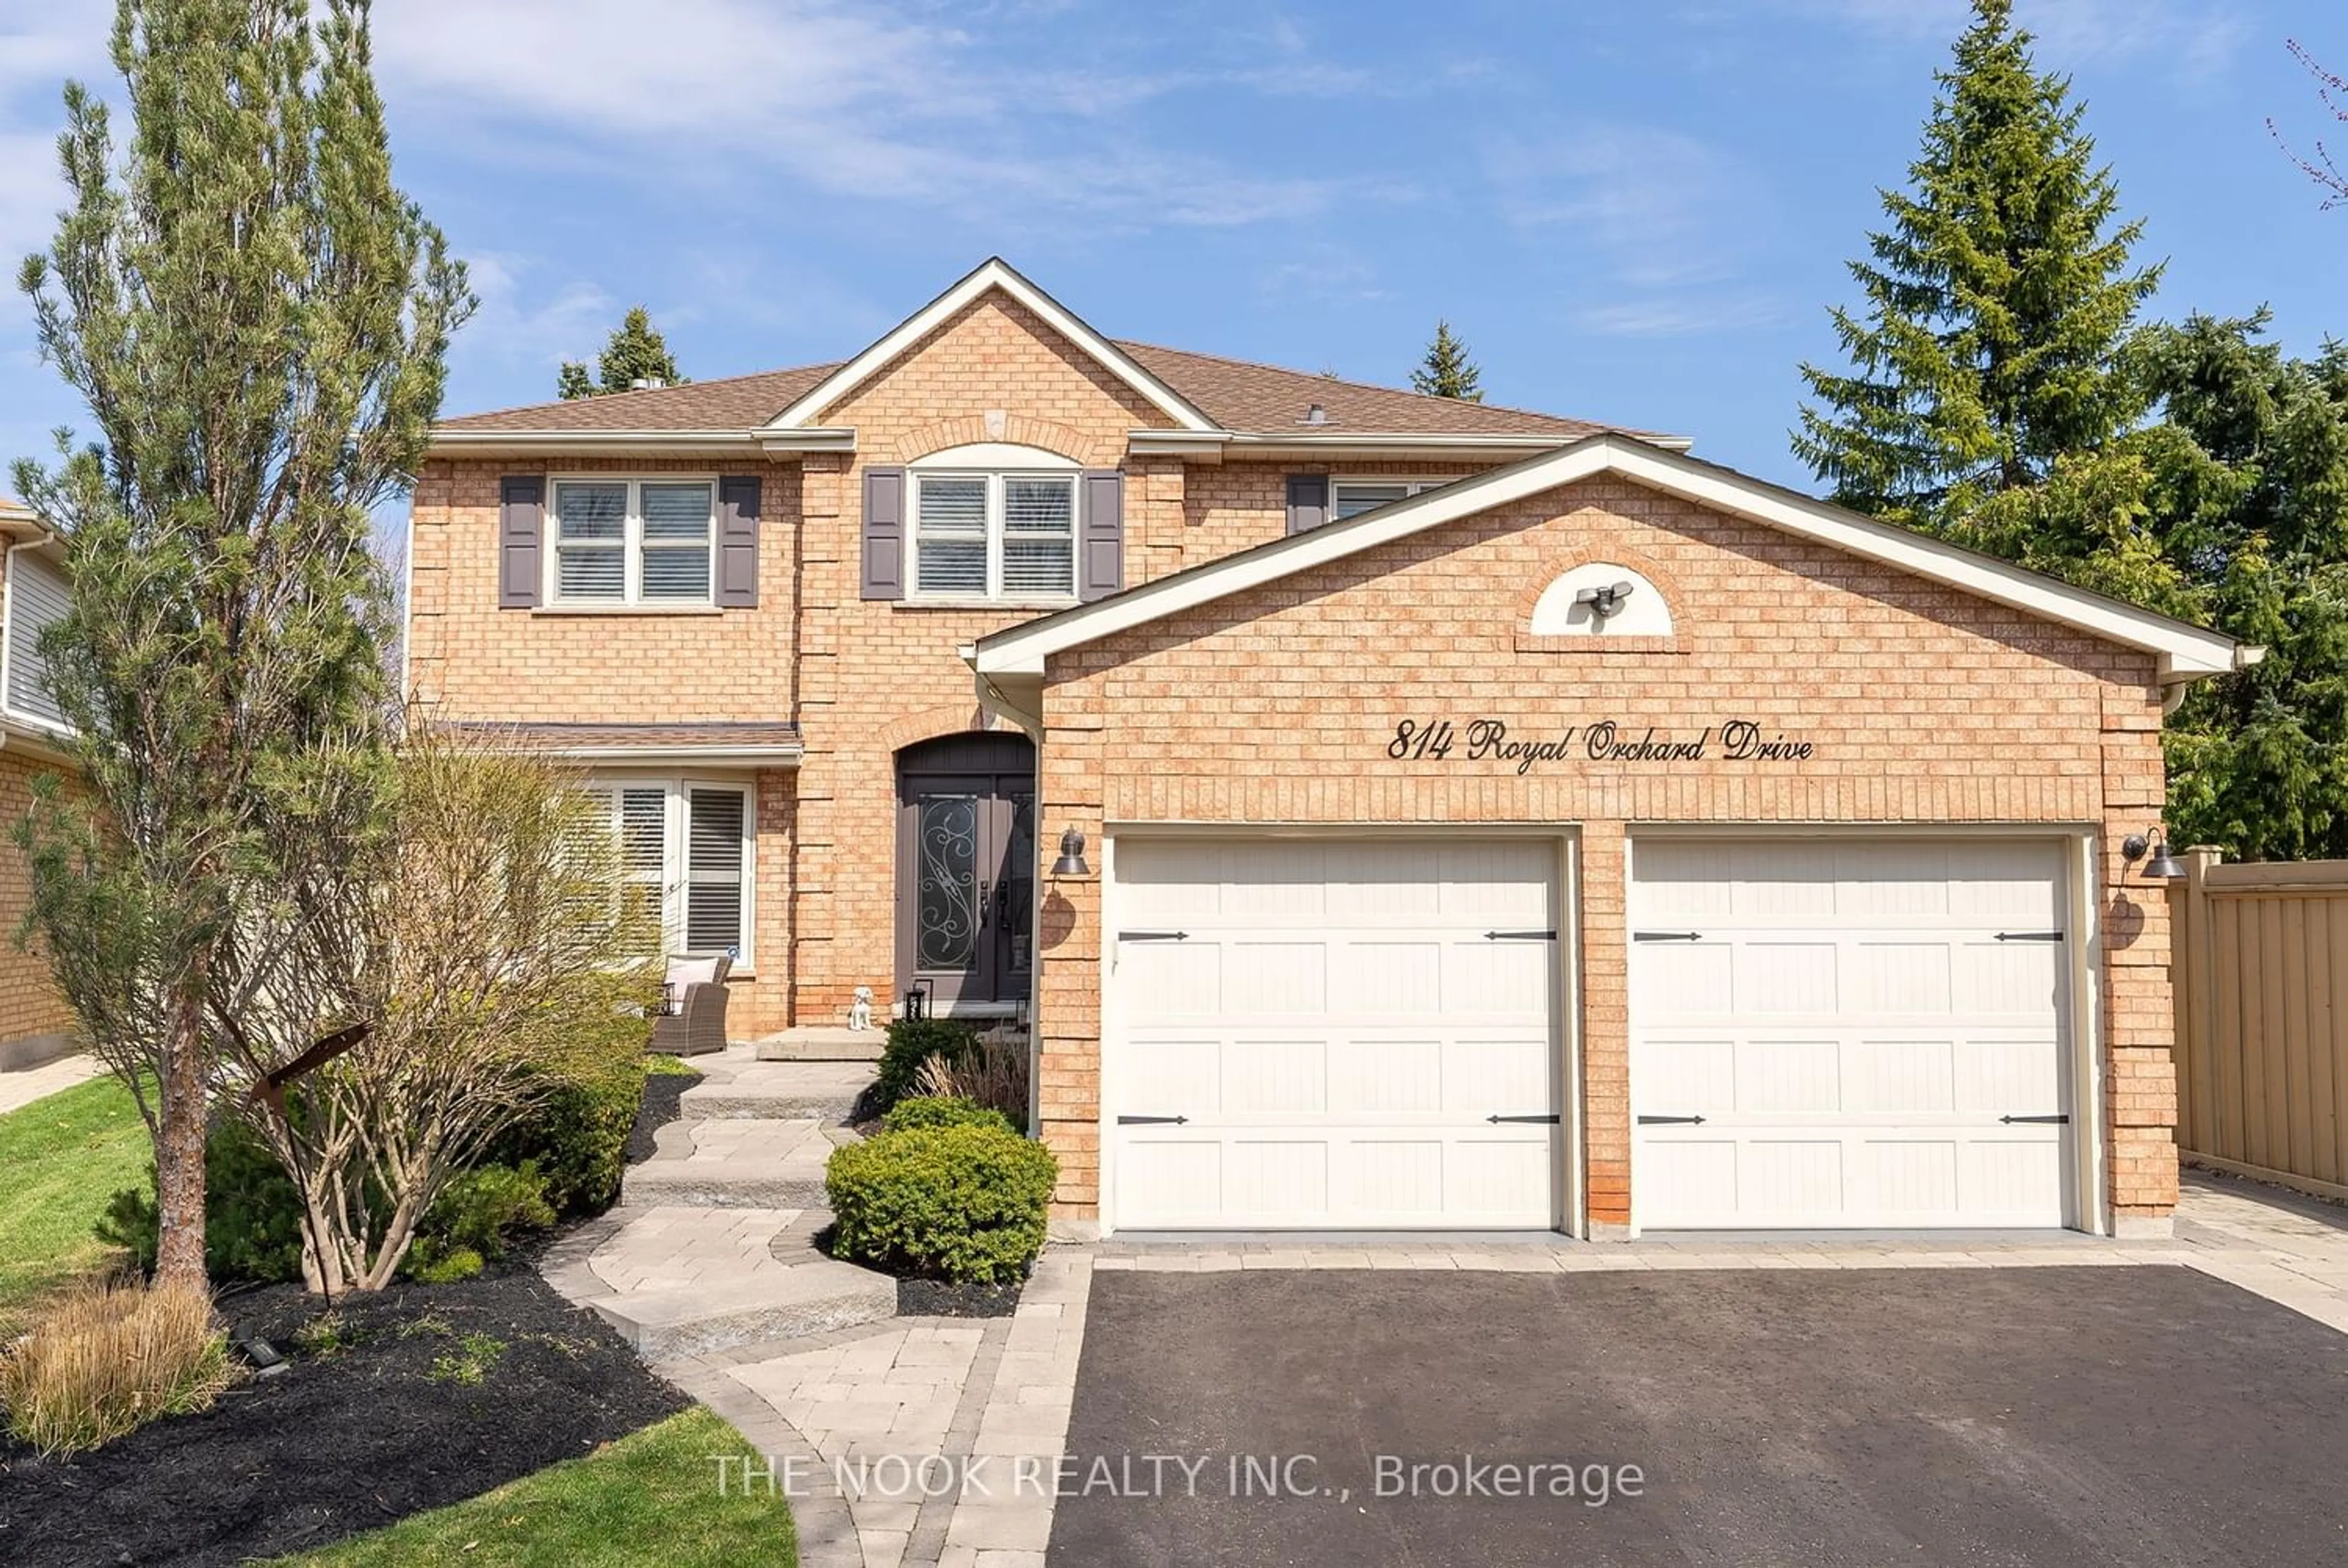 Home with brick exterior material for 814 Royal Orchard Dr, Oshawa Ontario L1K 1Z8